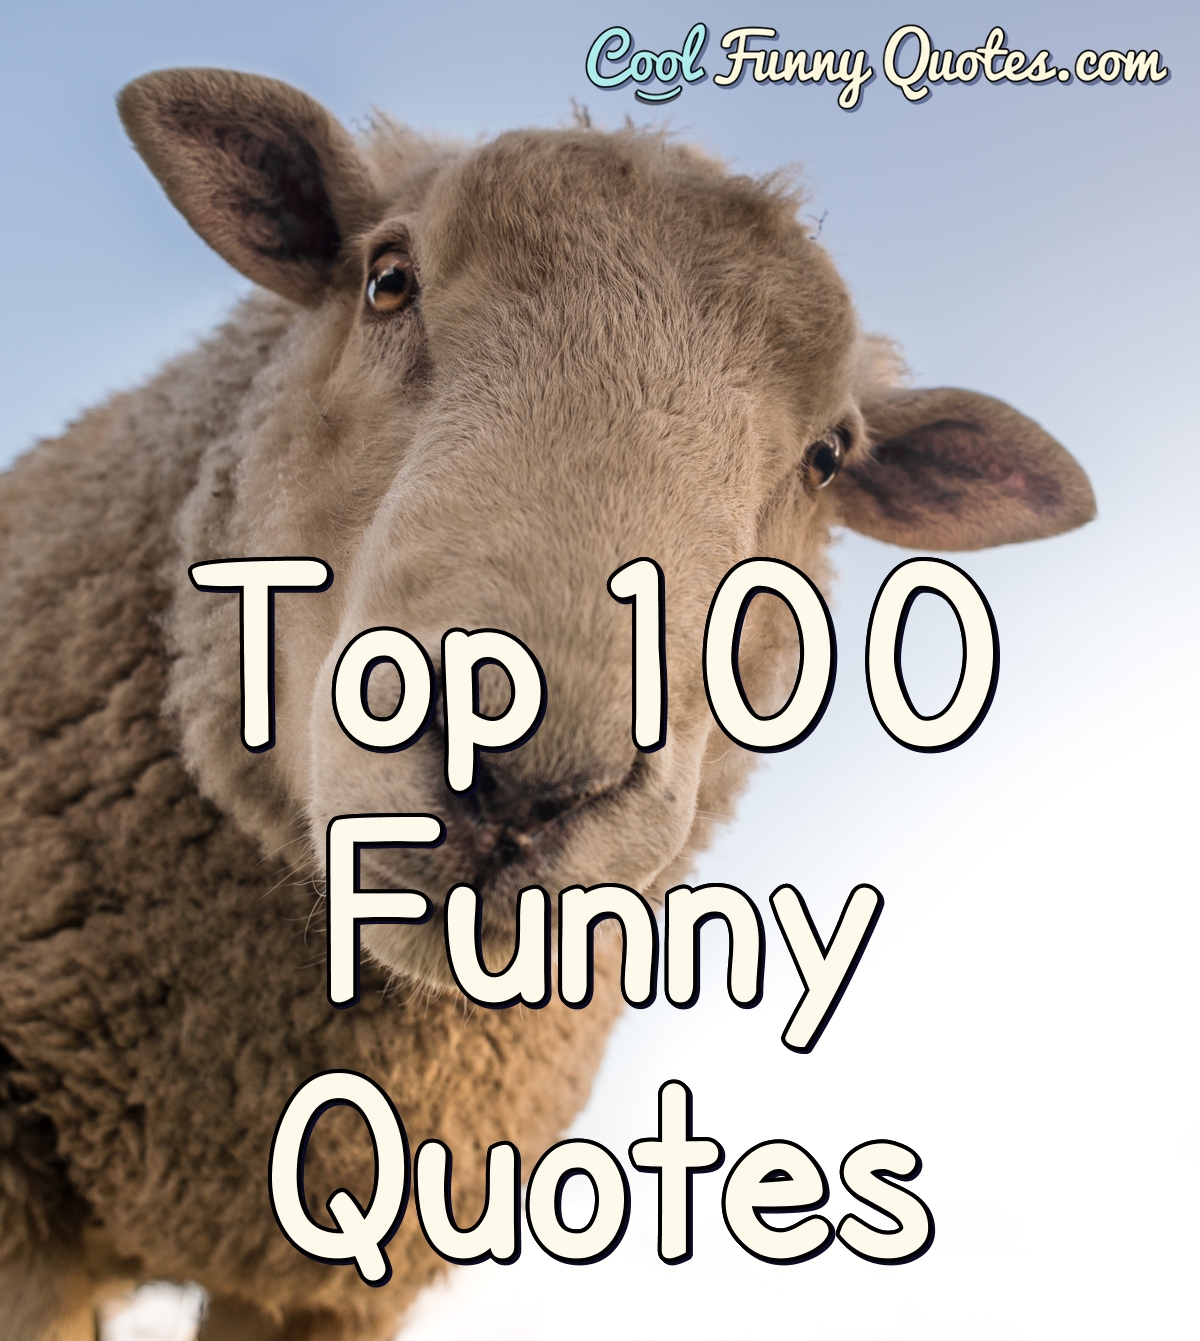 Top 100 Funny Quotes Cool Funny Quotes